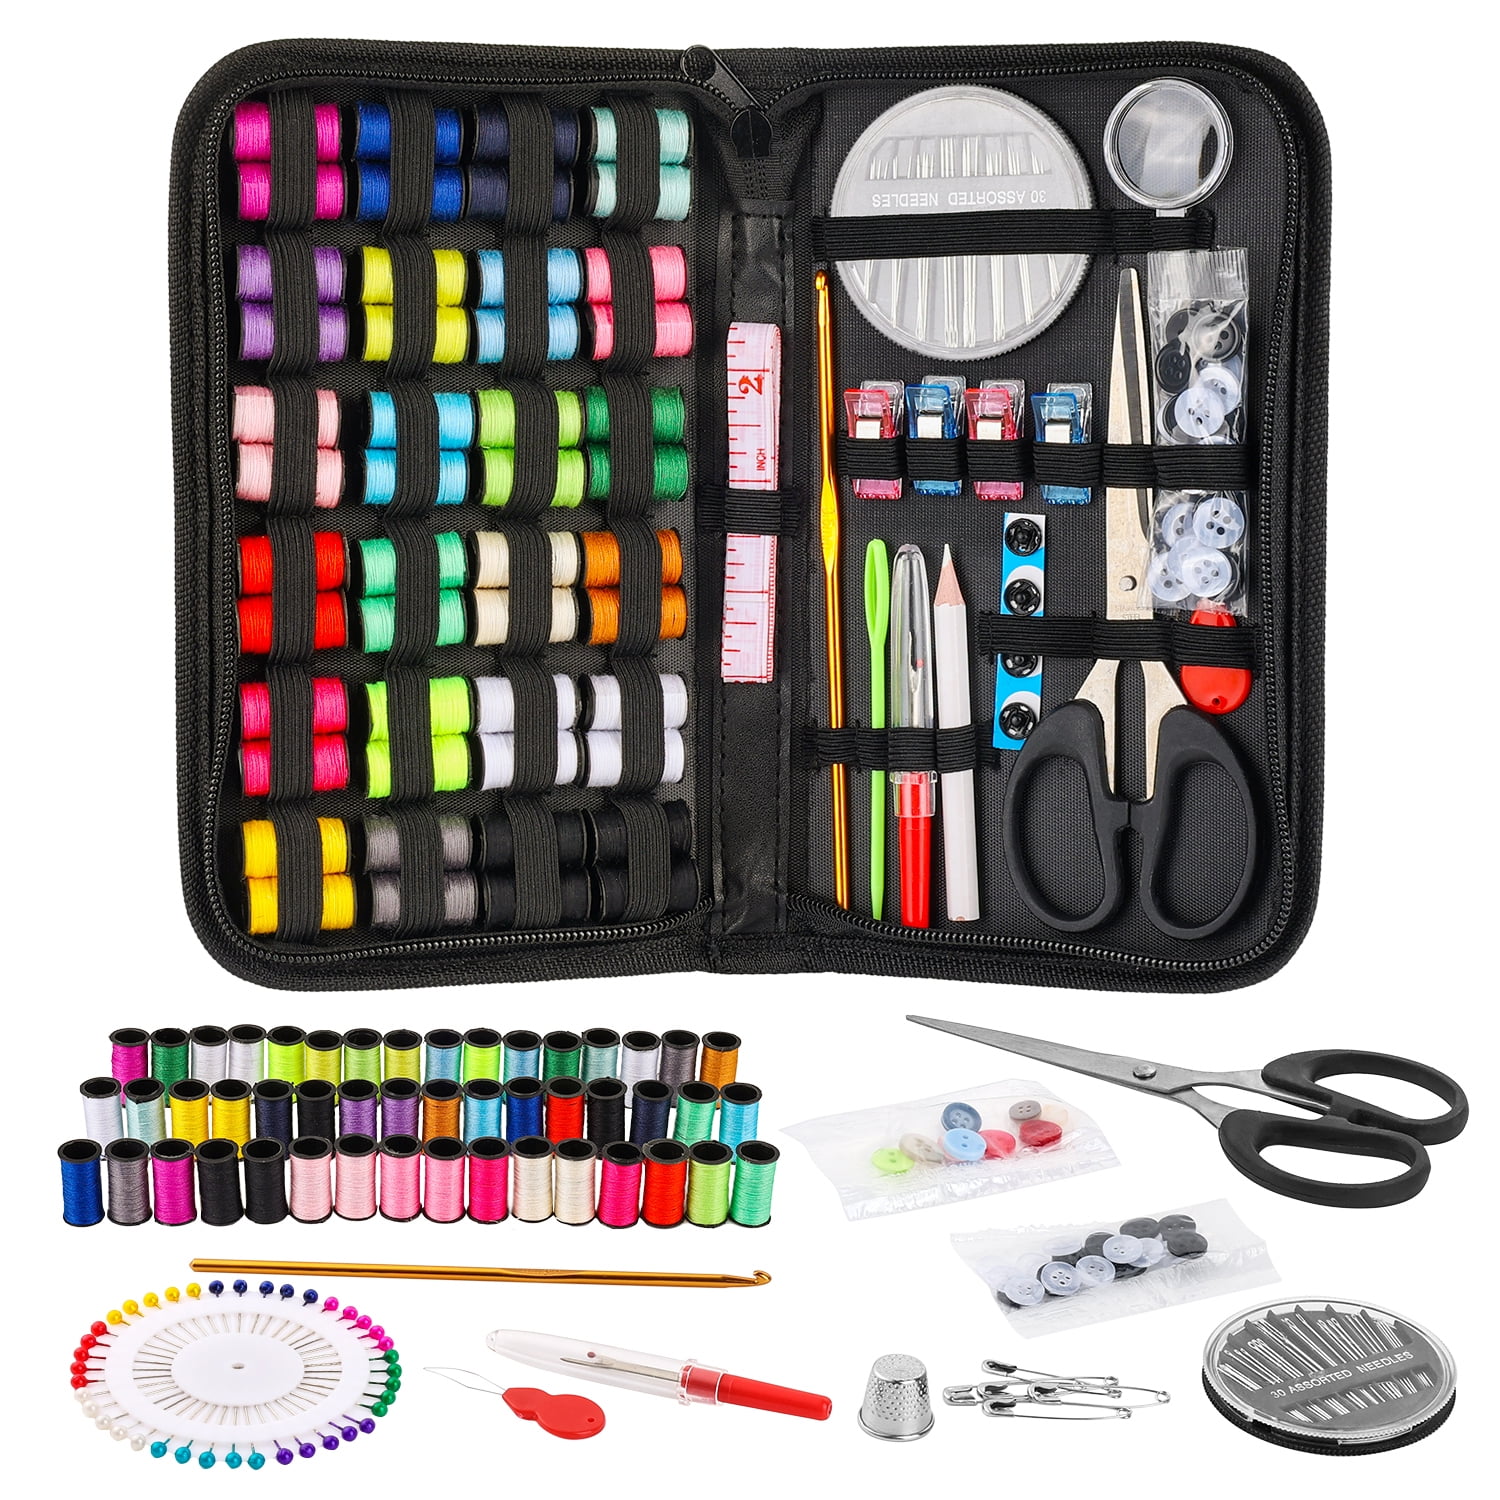 Anpro 172pcs Portable Travel Sewing Box Kit, Sew Set Needle and Thread, Multifunctional and Convenient Sewing Set for Home, Other